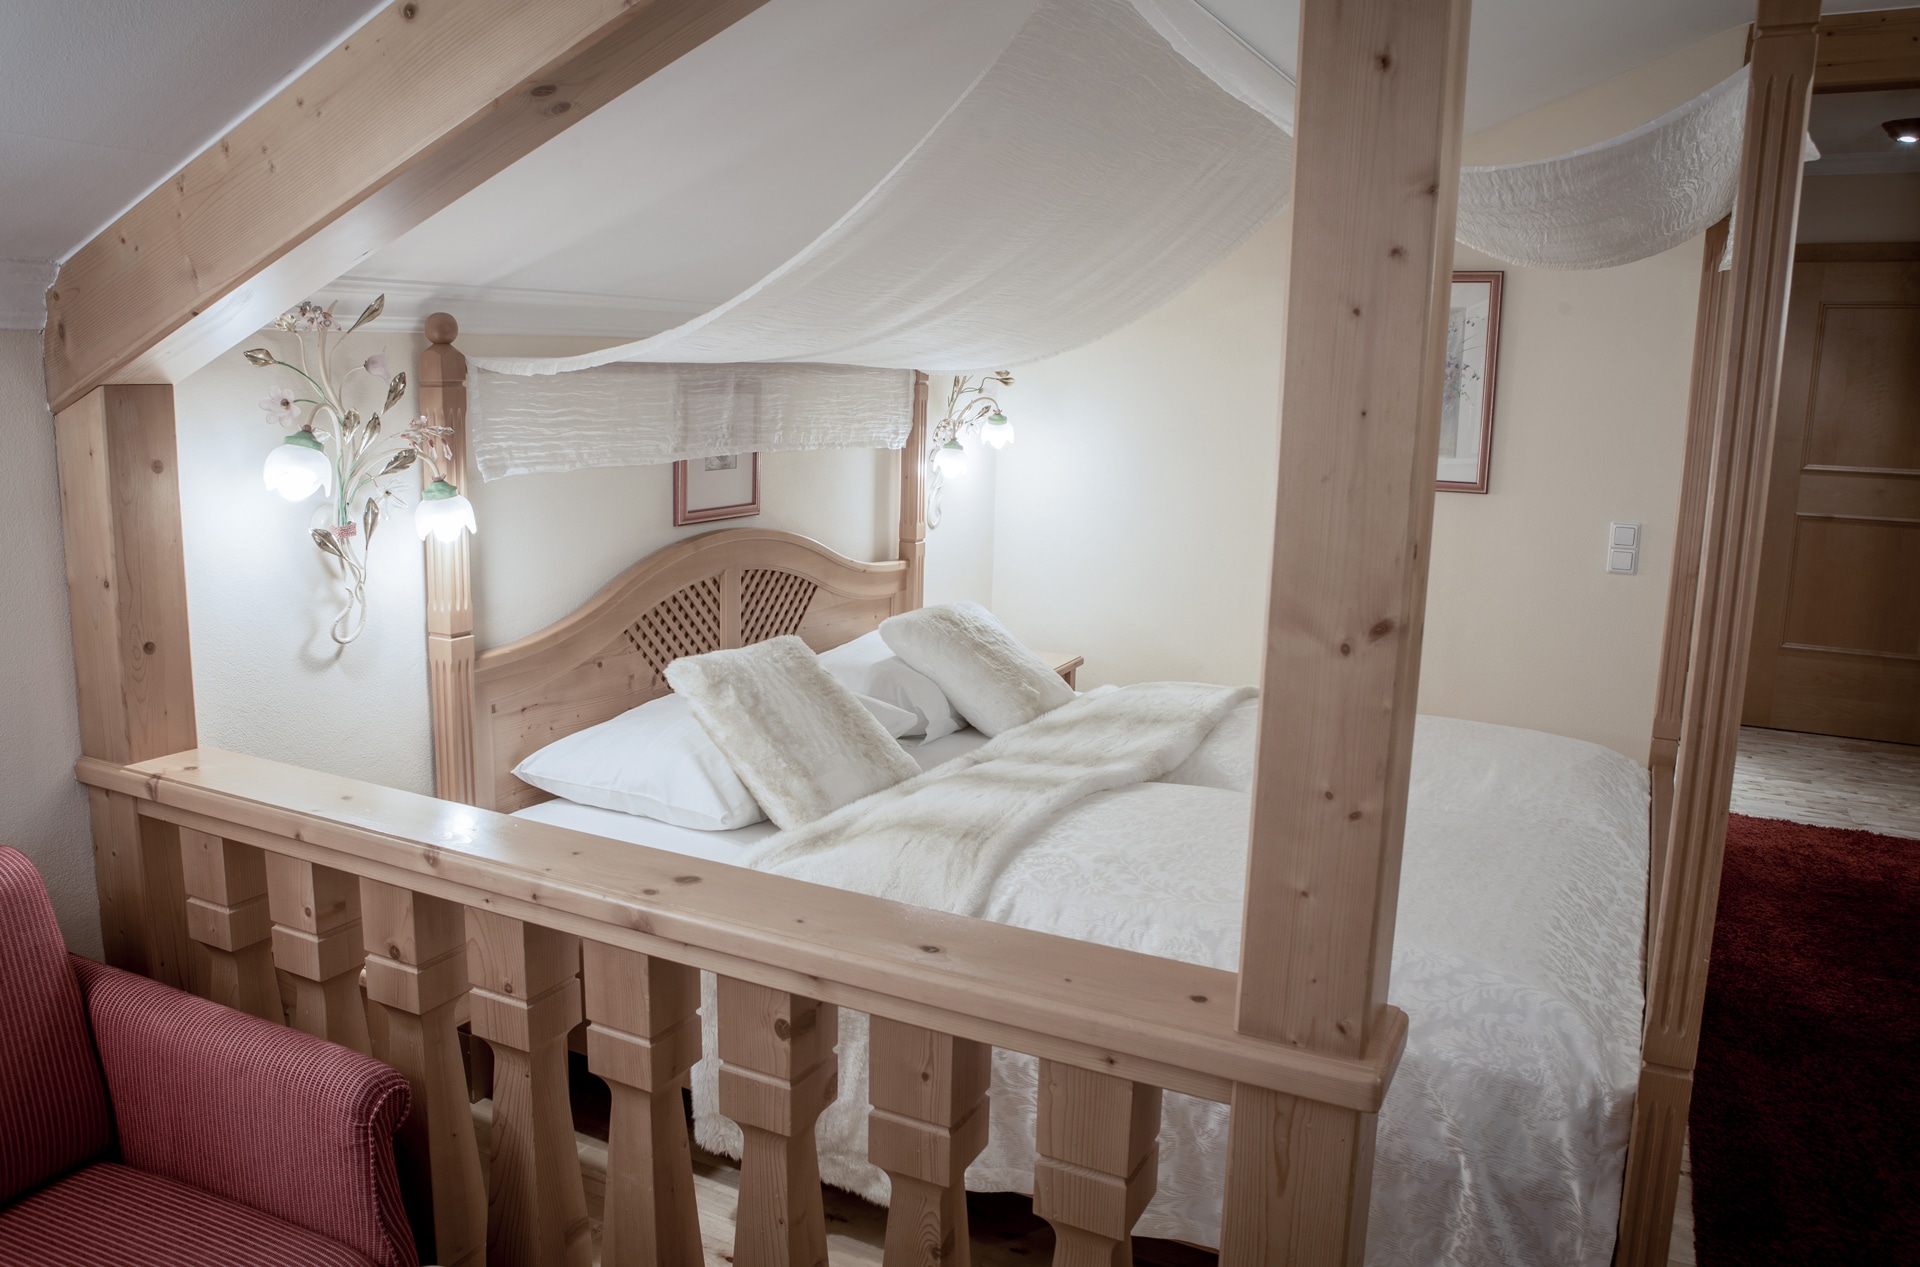 A cozy and inviting bedroom featuring a rustic wooden four-poster bed draped with sheer curtains, complete with plush pillows and a soft comforter, all bathed in warm ambient lighting, creating a snug and peaceful sleeping nook.